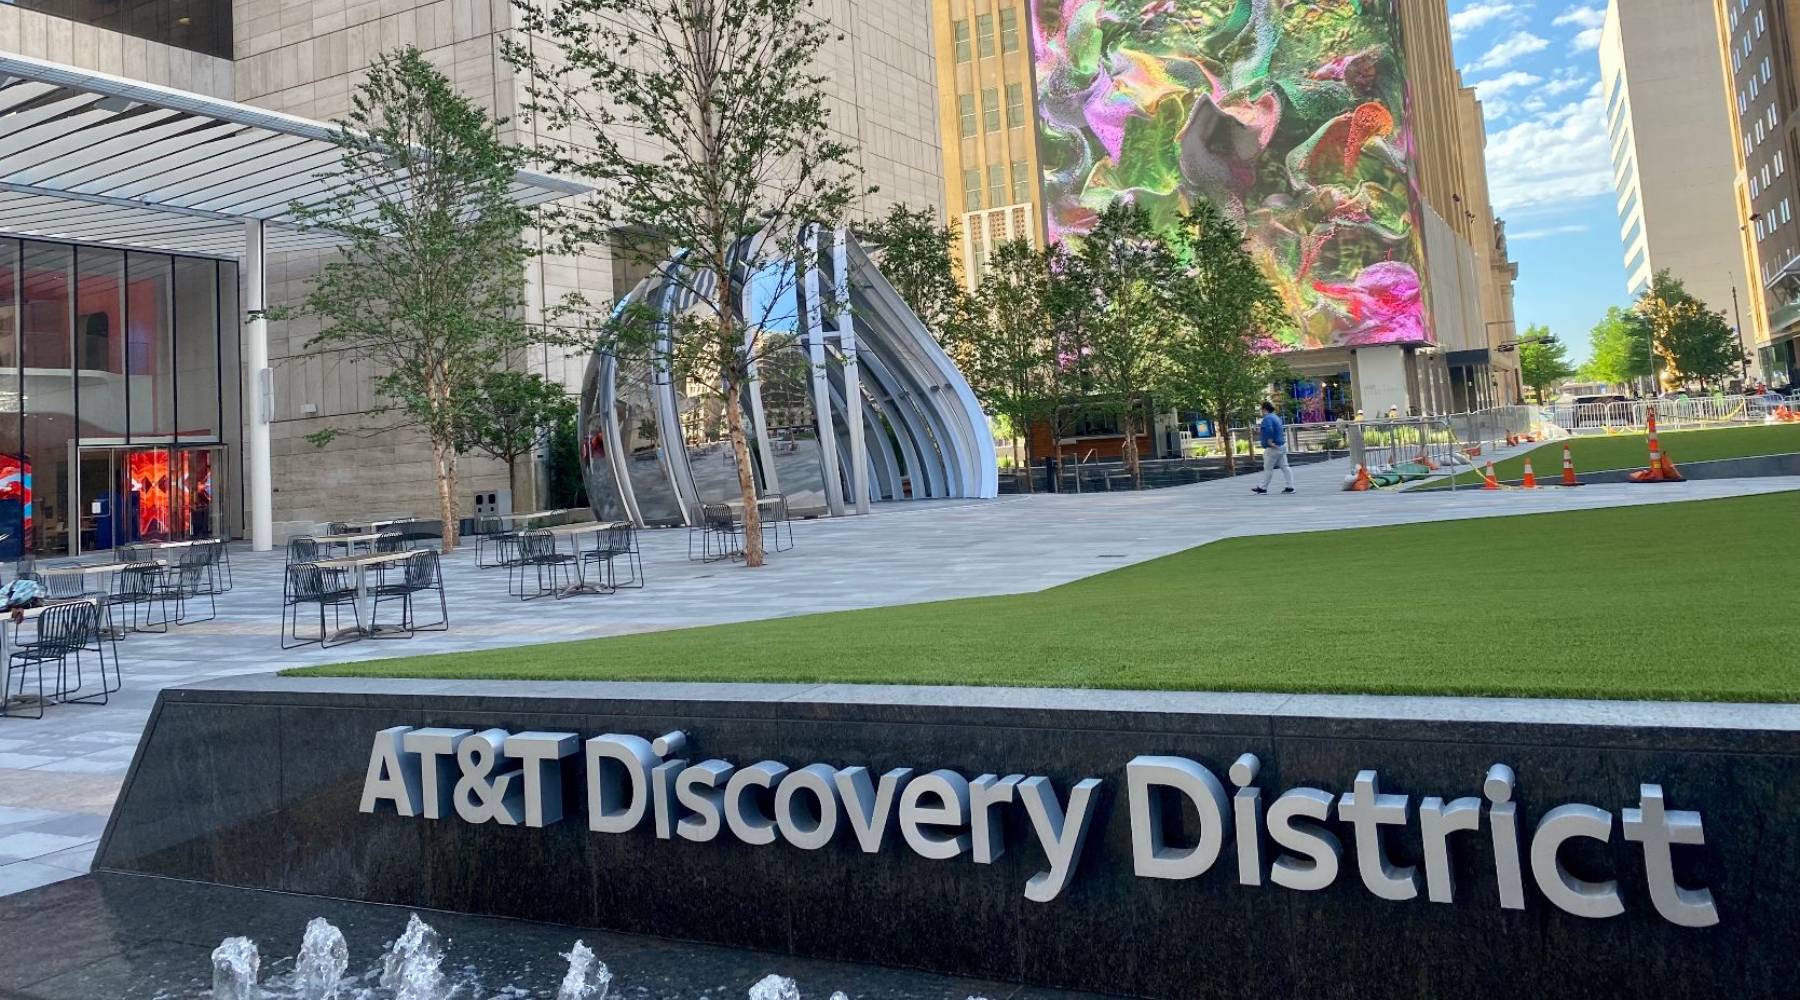 Discovery district commercial artificial grass installation